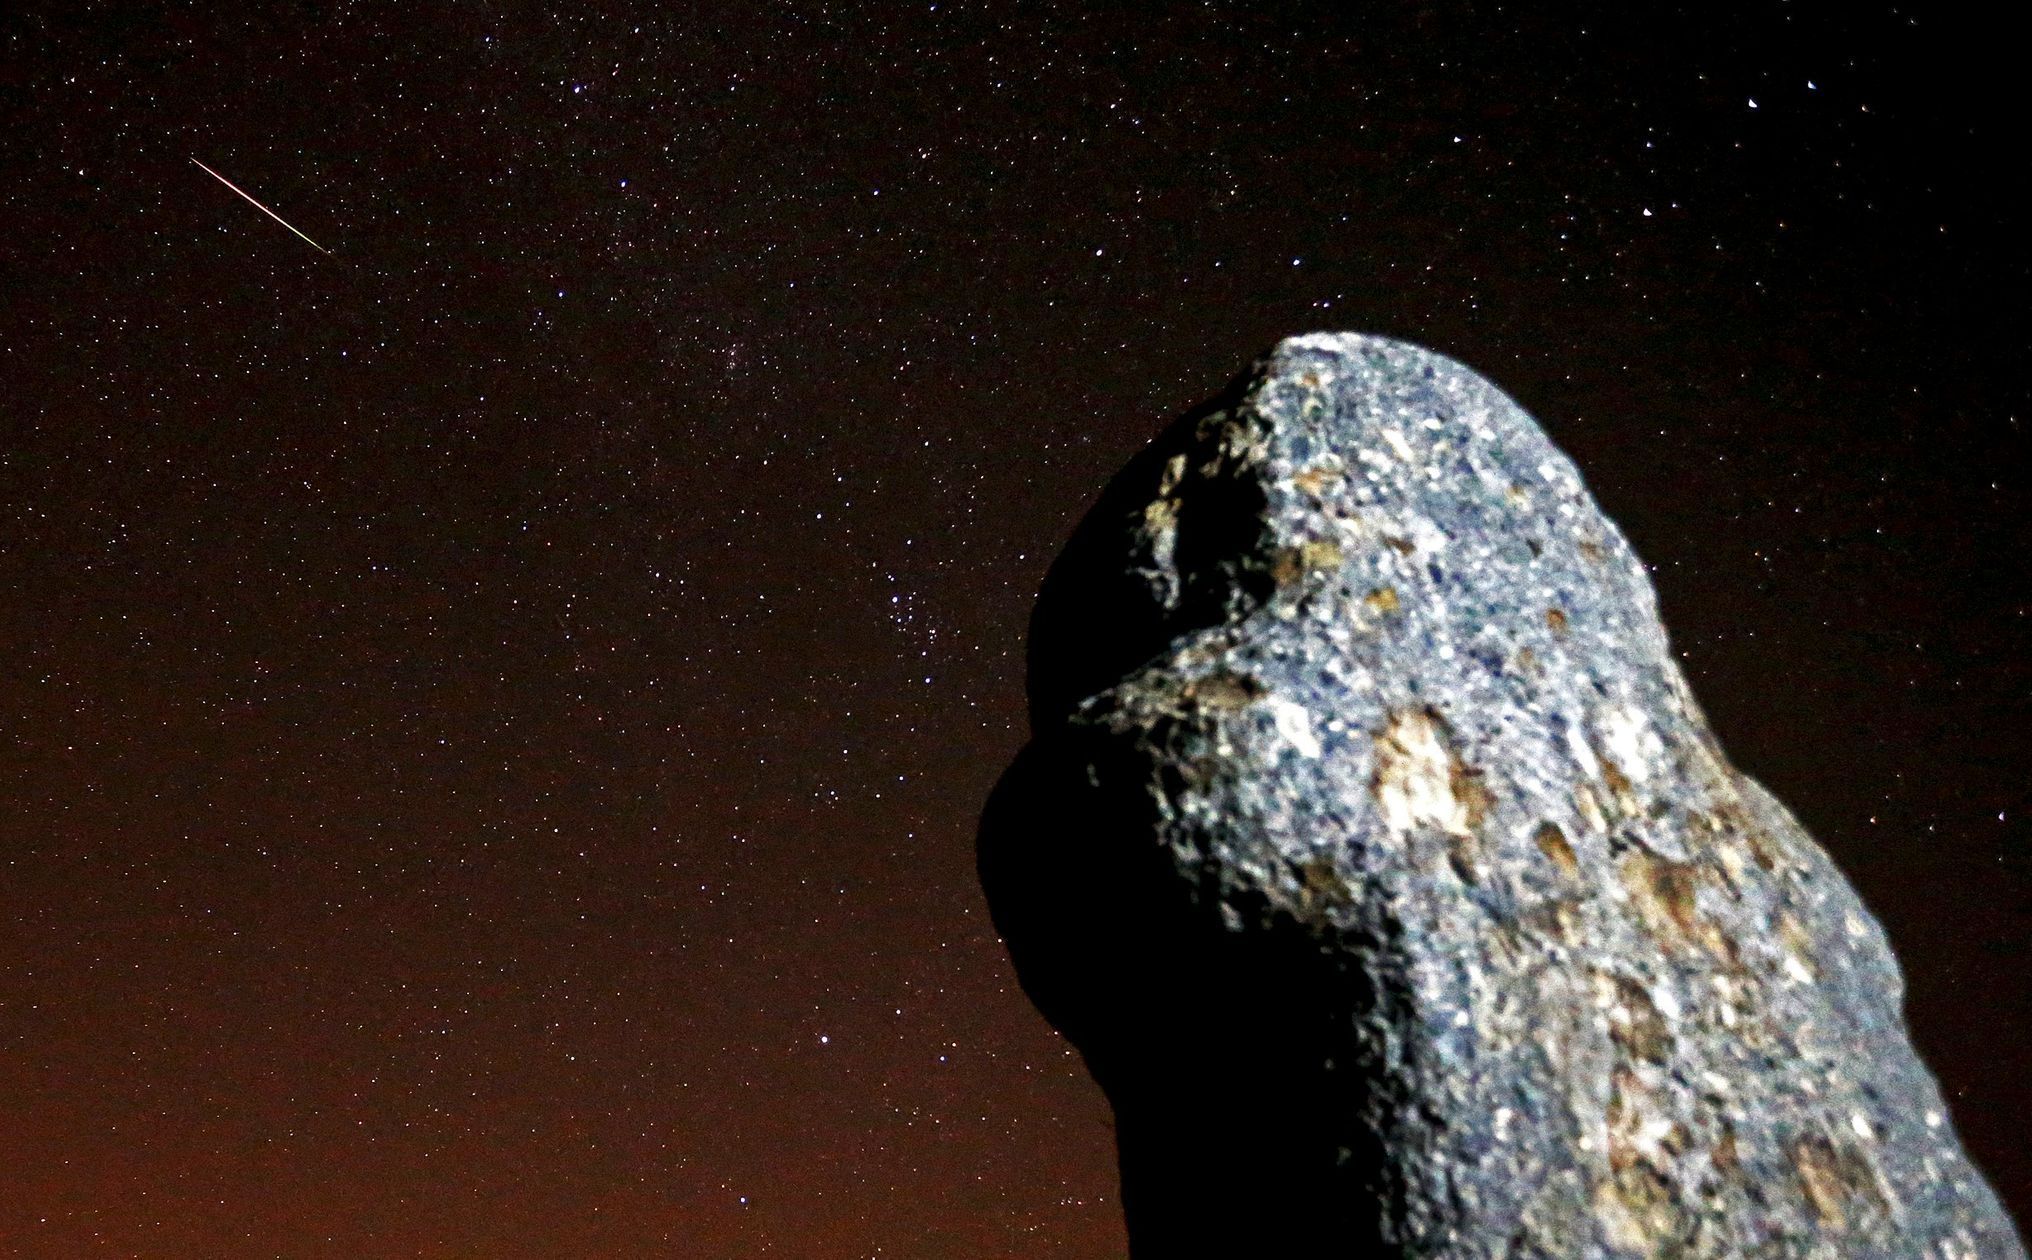 A meteor streaks across the sky during the Perseid meteor shower at the Maculje archaeological site near Novi Travnik in the early morning